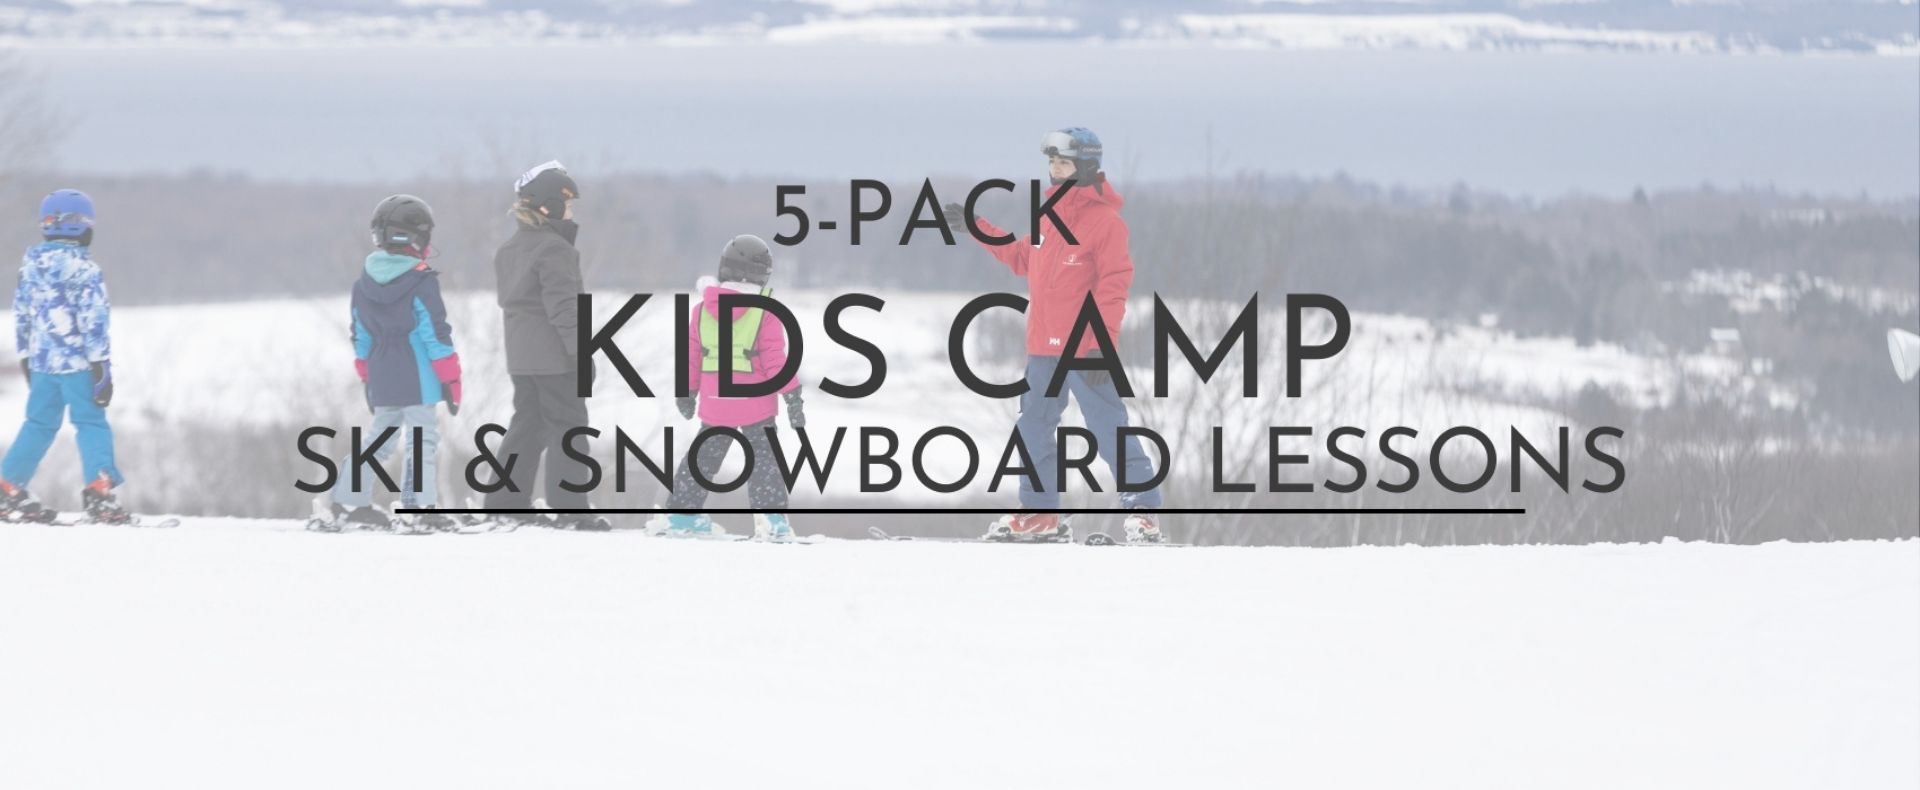 Kids Camp Group Lessons 5-Pack